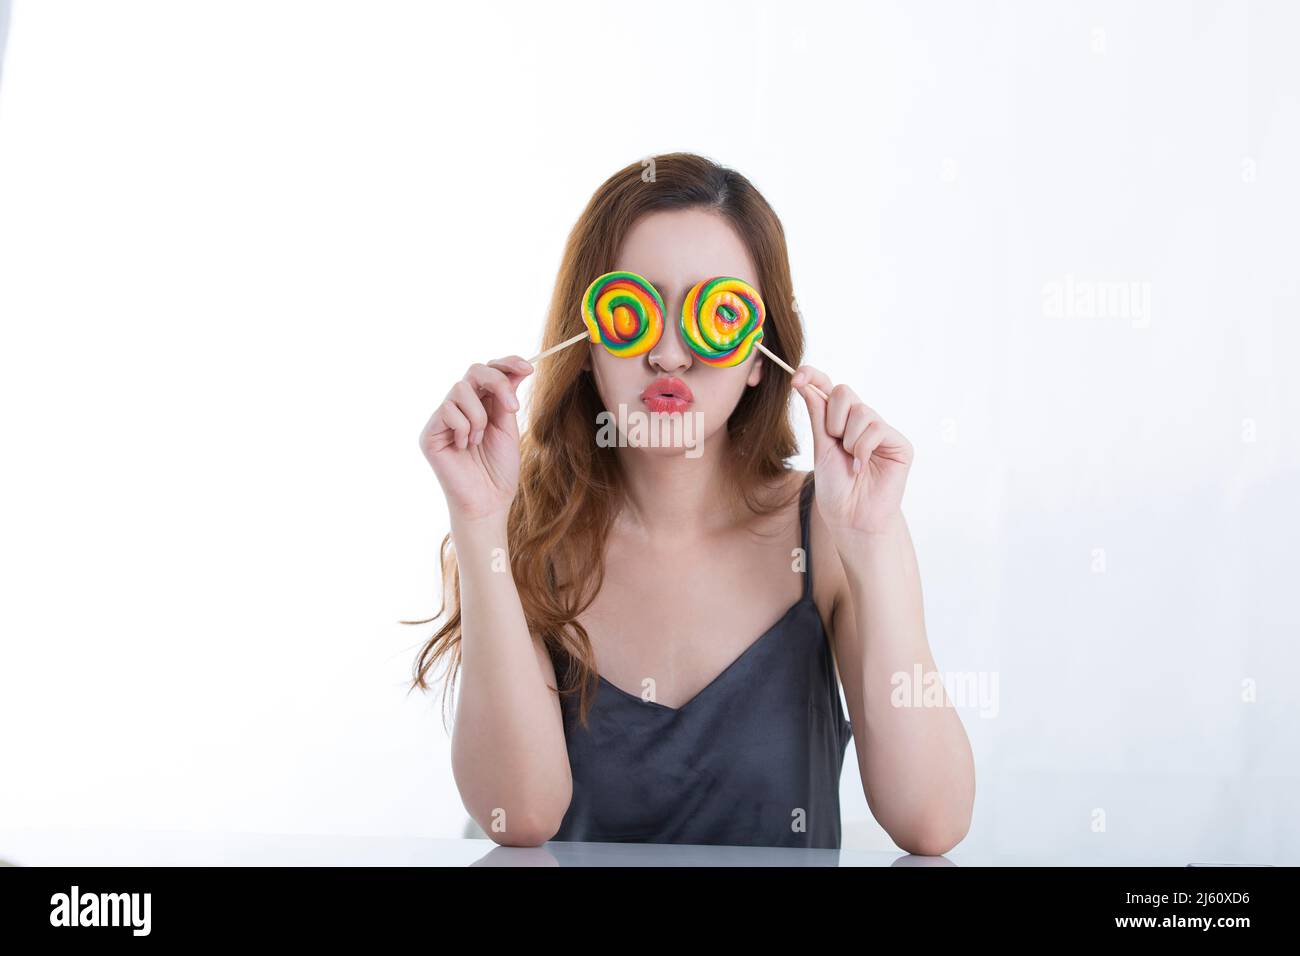 Pretty young lady playfully shielded her eyes with two colorful lollipops, on white background - stock photo Stock Photo